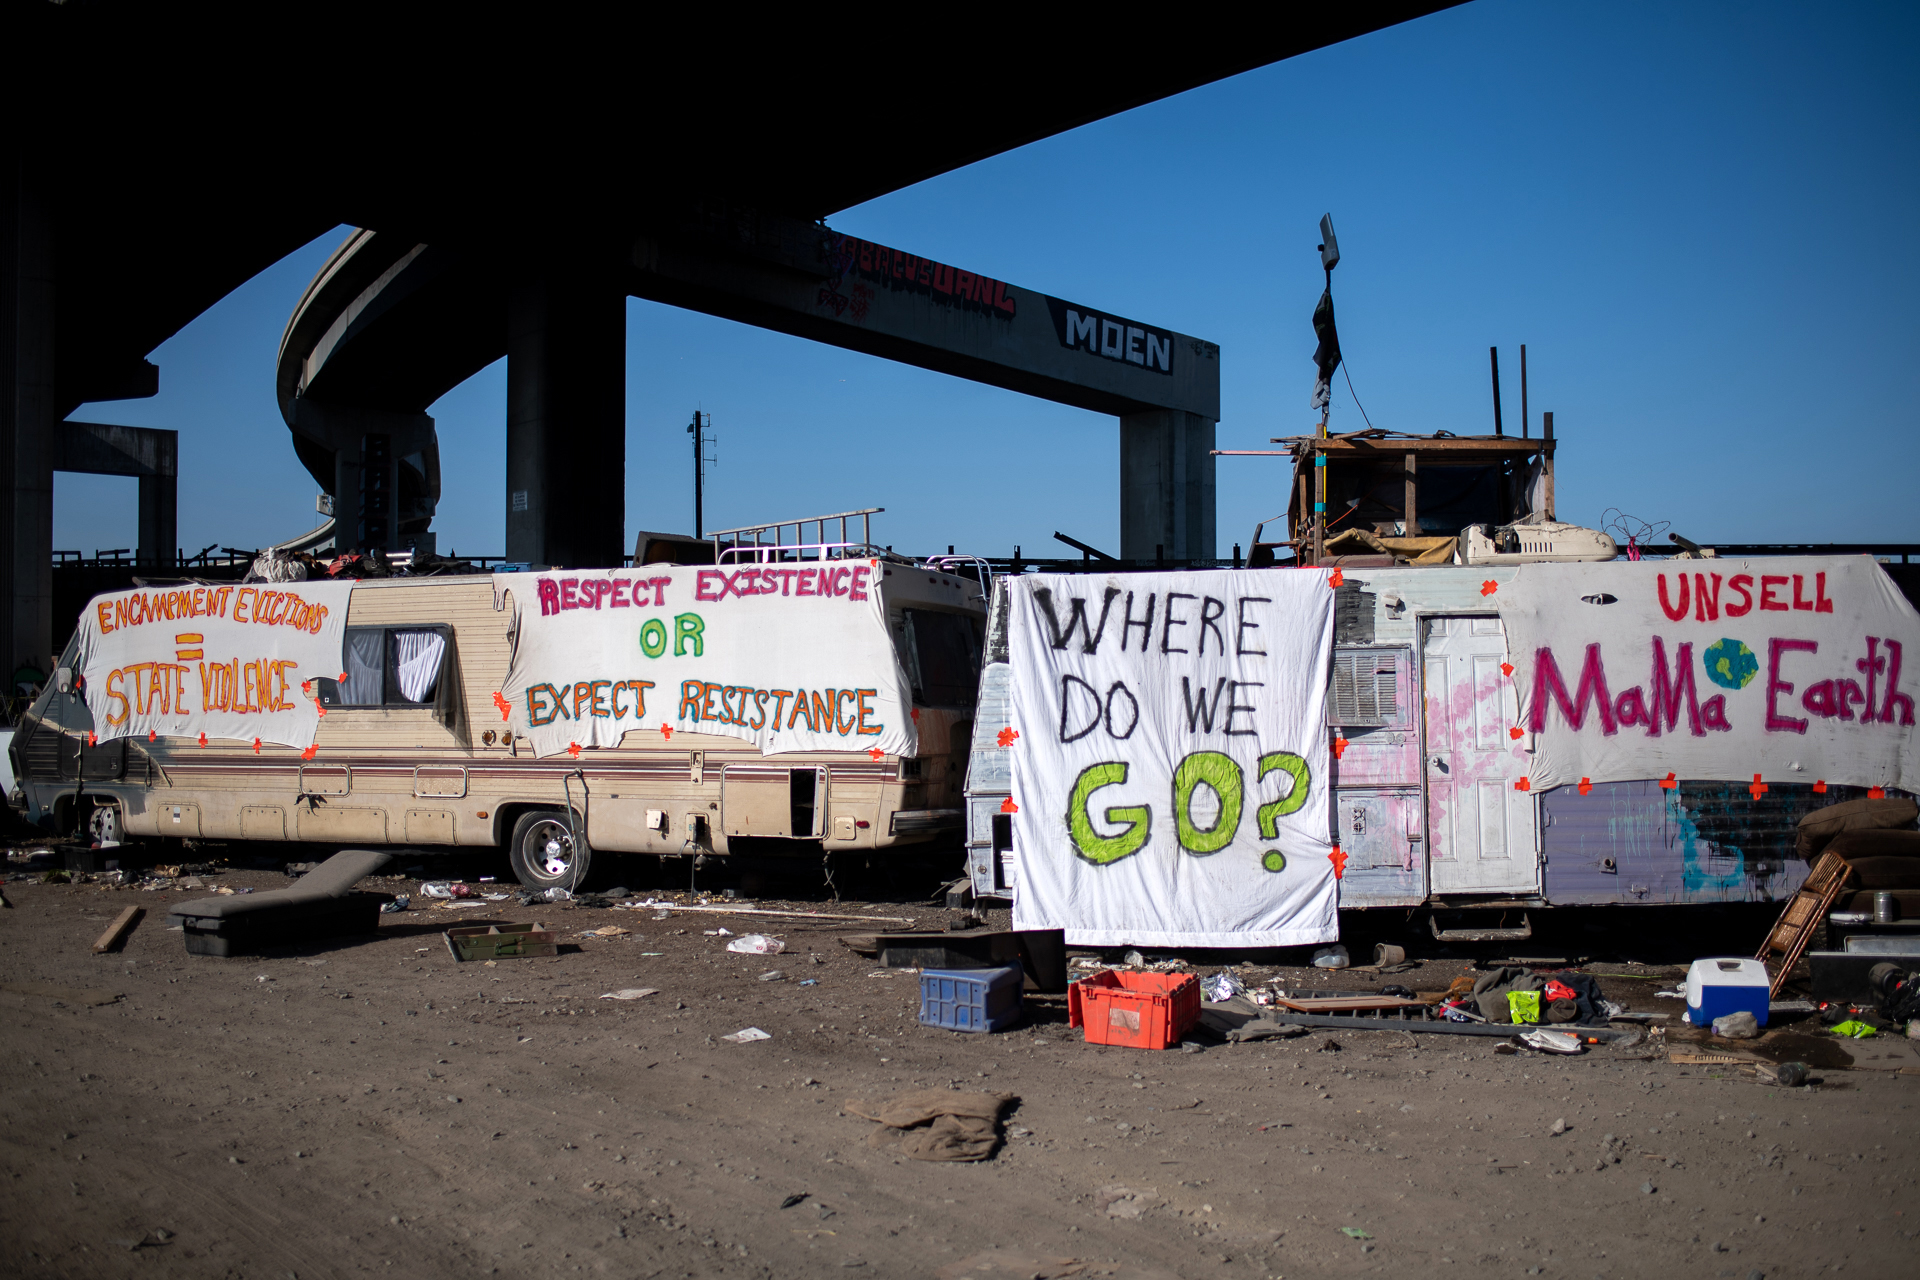 RVs in an encampment with signs that read "Where do we go?" and "Respect existence or expect resistance."